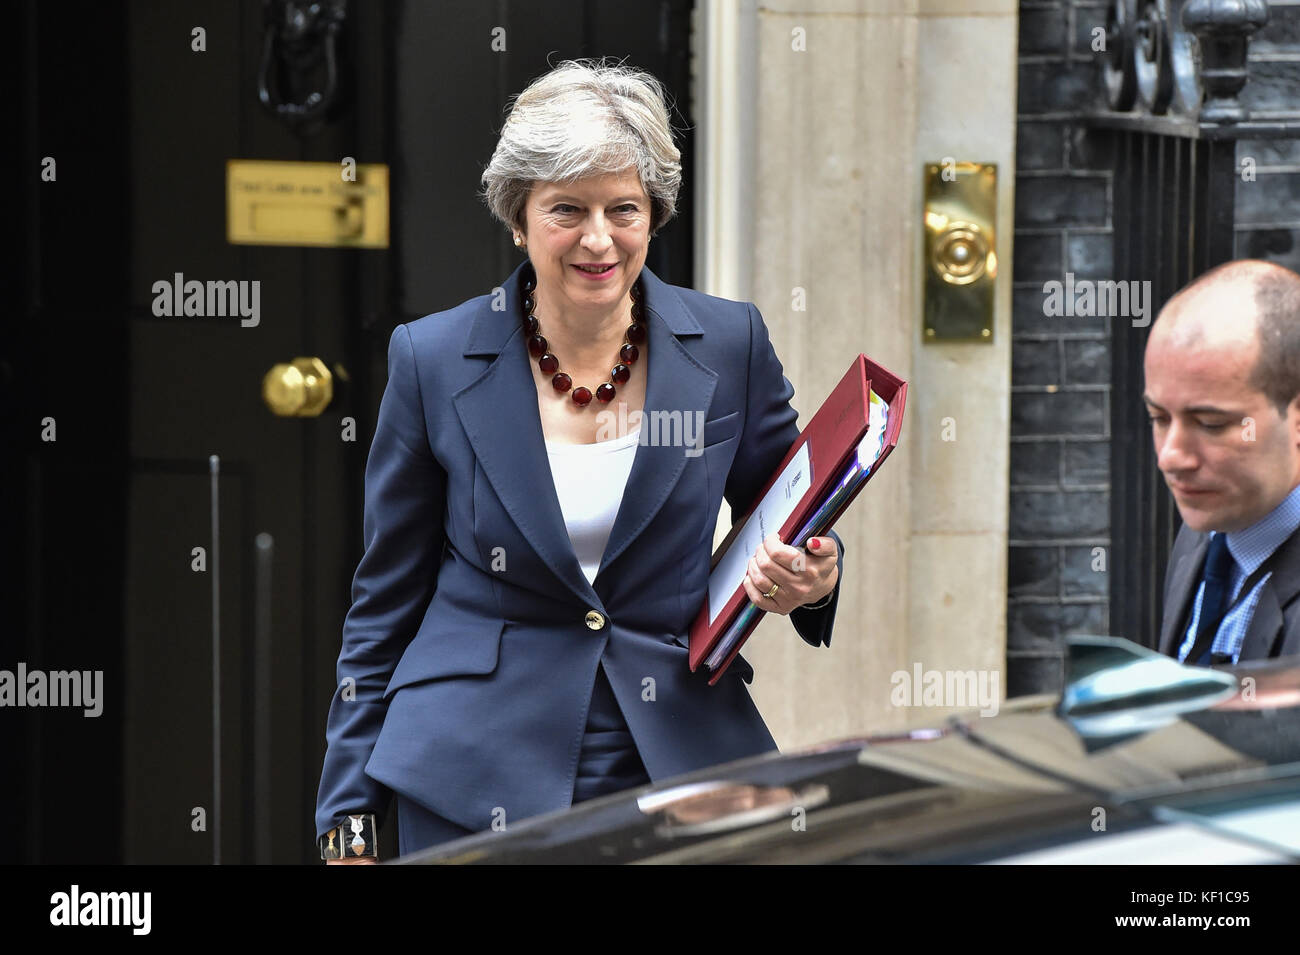 London, United Kingdom. 25th Oct, 2017. Prime Minister Theresa May leaves 10 Downing Street bound for the House of Commons for Prime Ministers Questions. Credit: Peter Manning/Alamy Live News Stock Photo